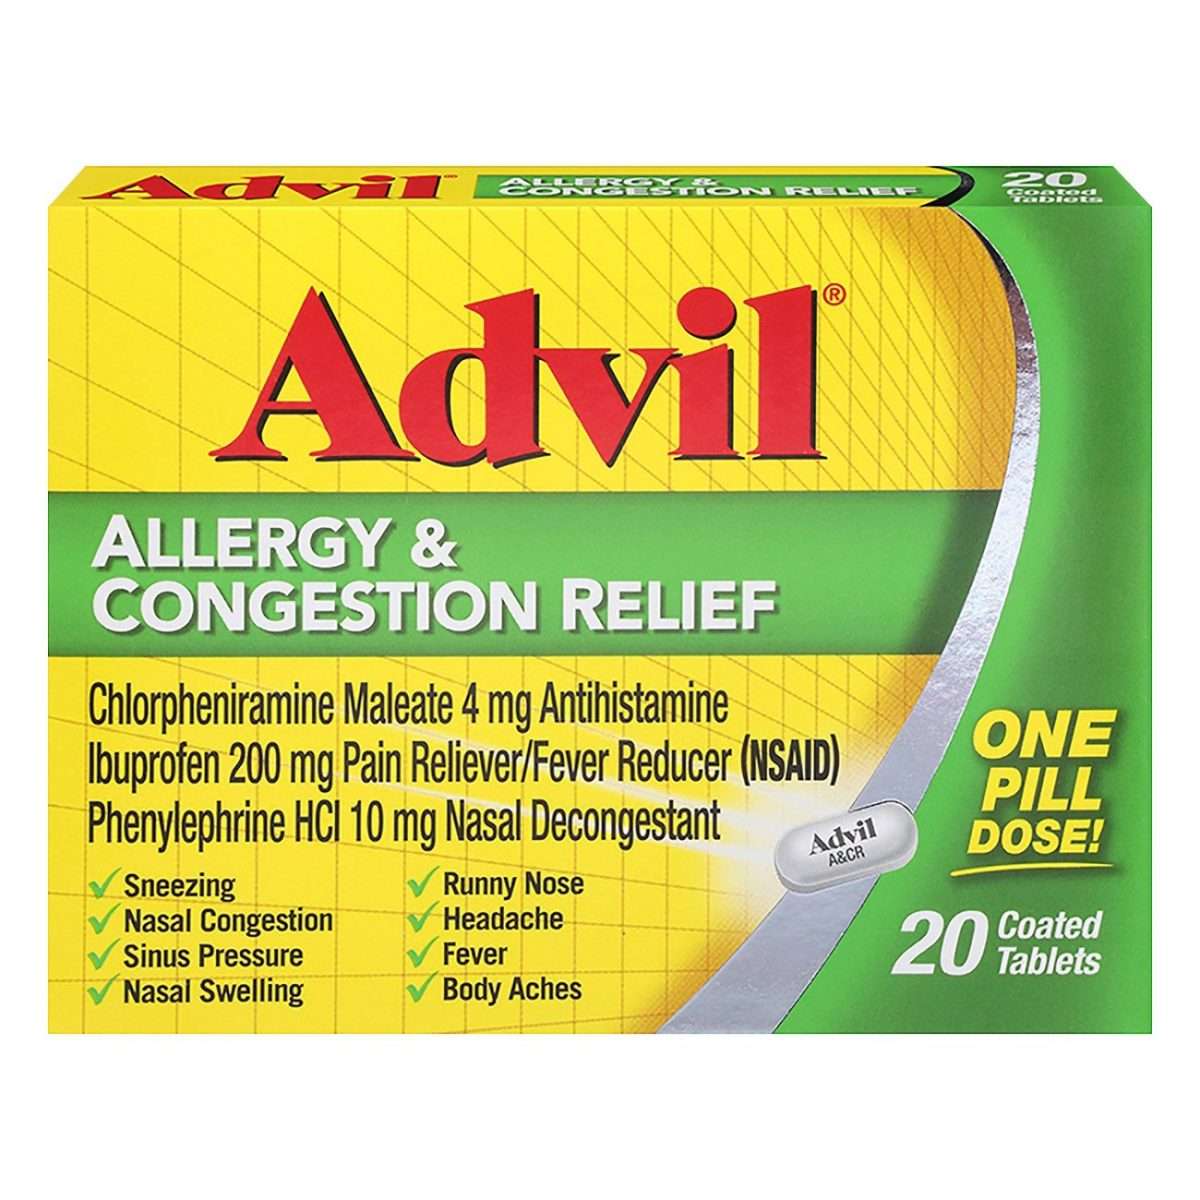 Advil Allergy &  Congestion Relief Ibuprofen Coated Tablets